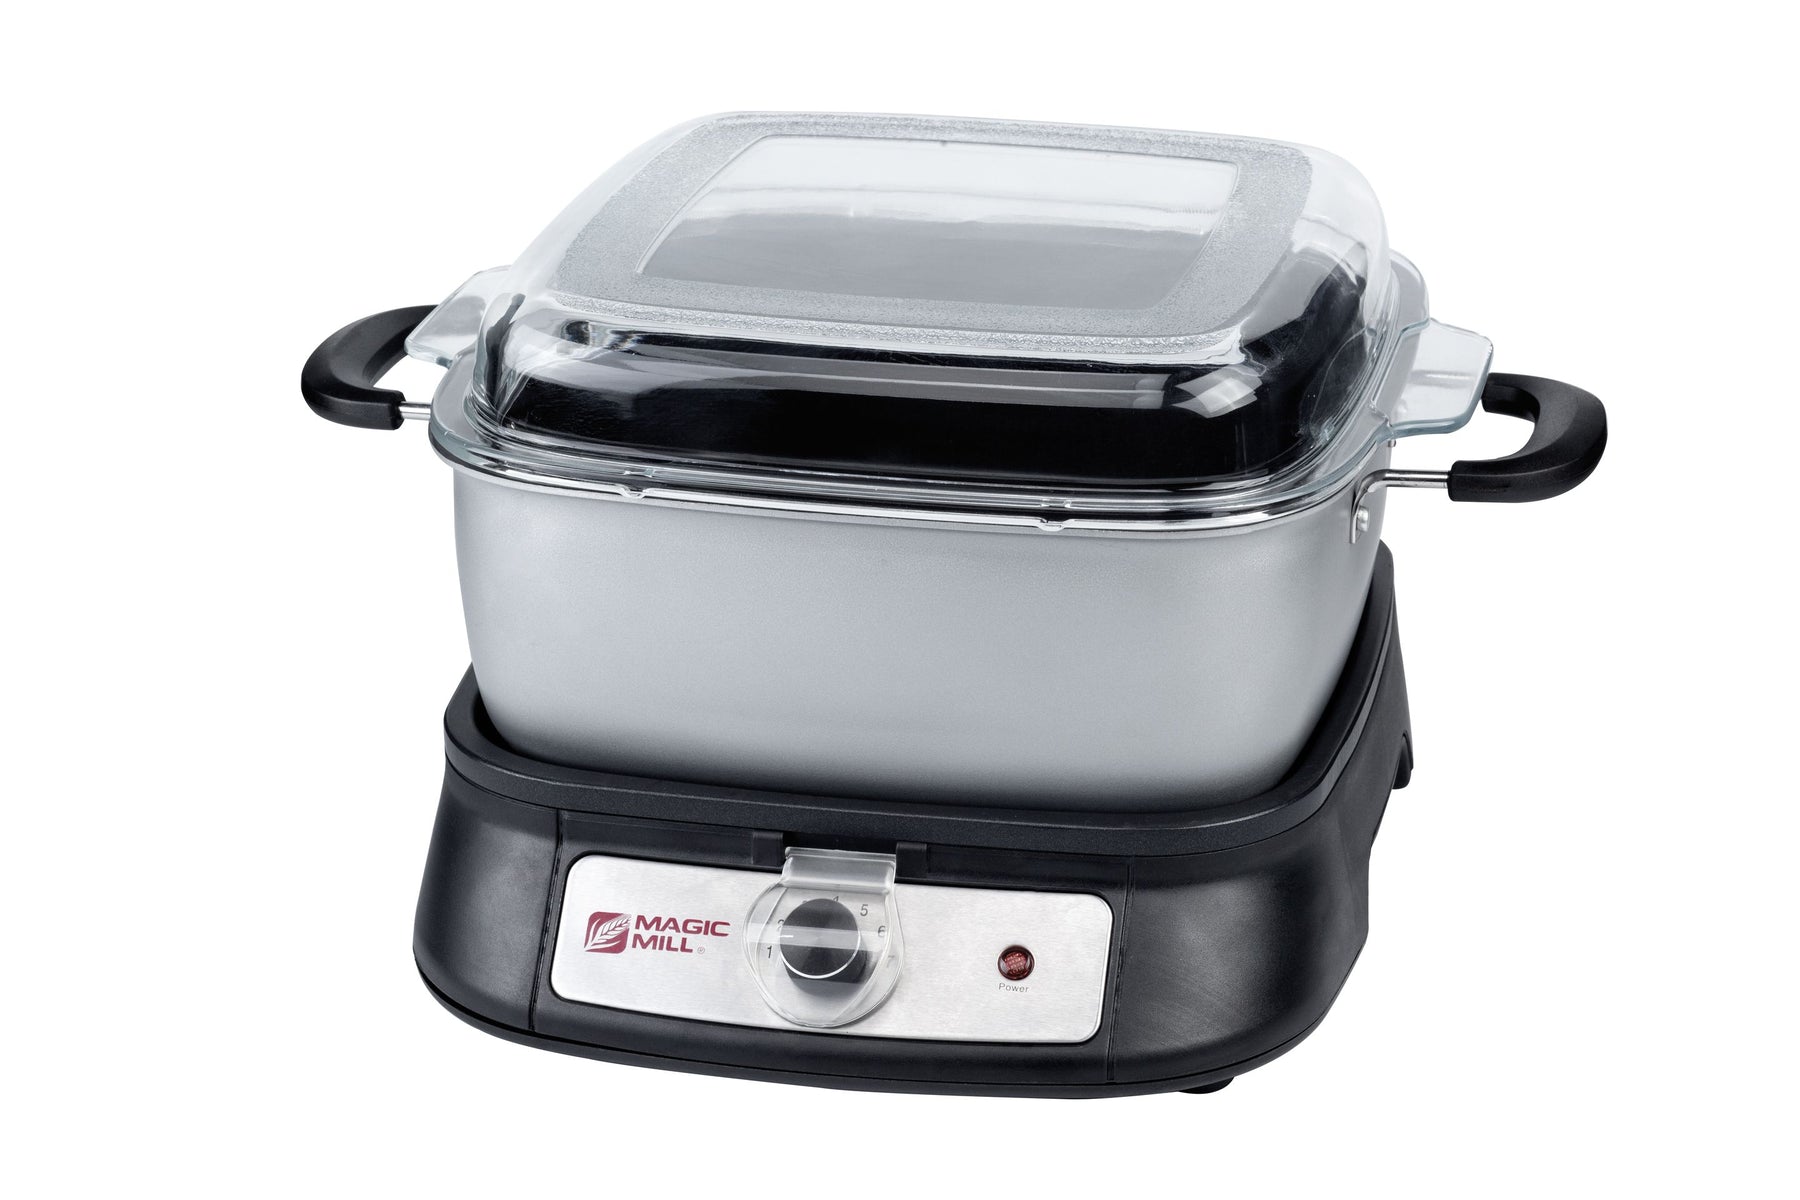 MAGIC MILL 6 QT 220V GRAY SLOW COOKER WITH FLAT GLASS COVER AND